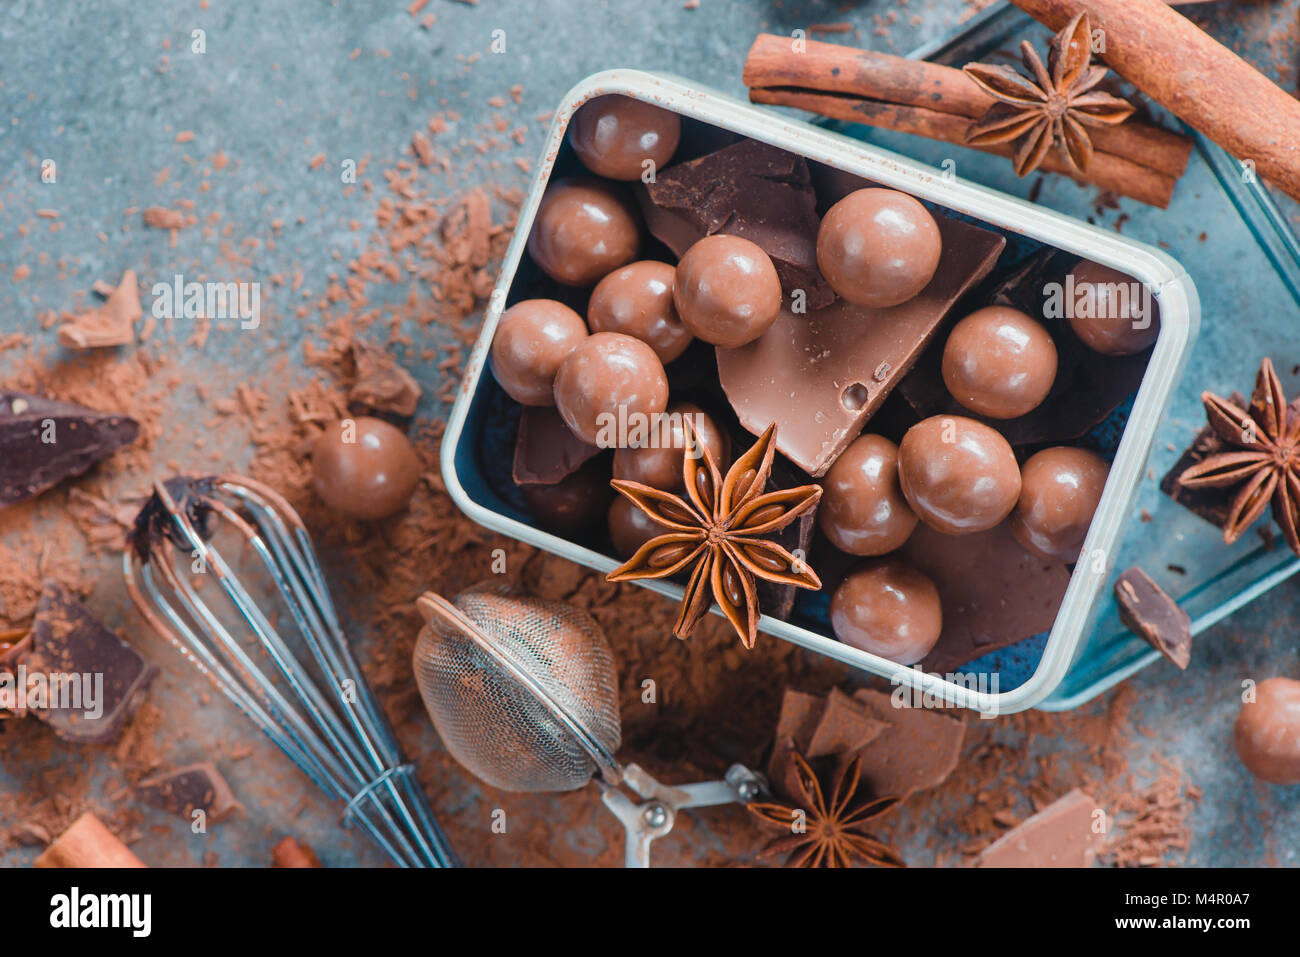 Round chocolates in a rustic metal box. Confectionery food photography. Close-up with copy space. Stock Photo